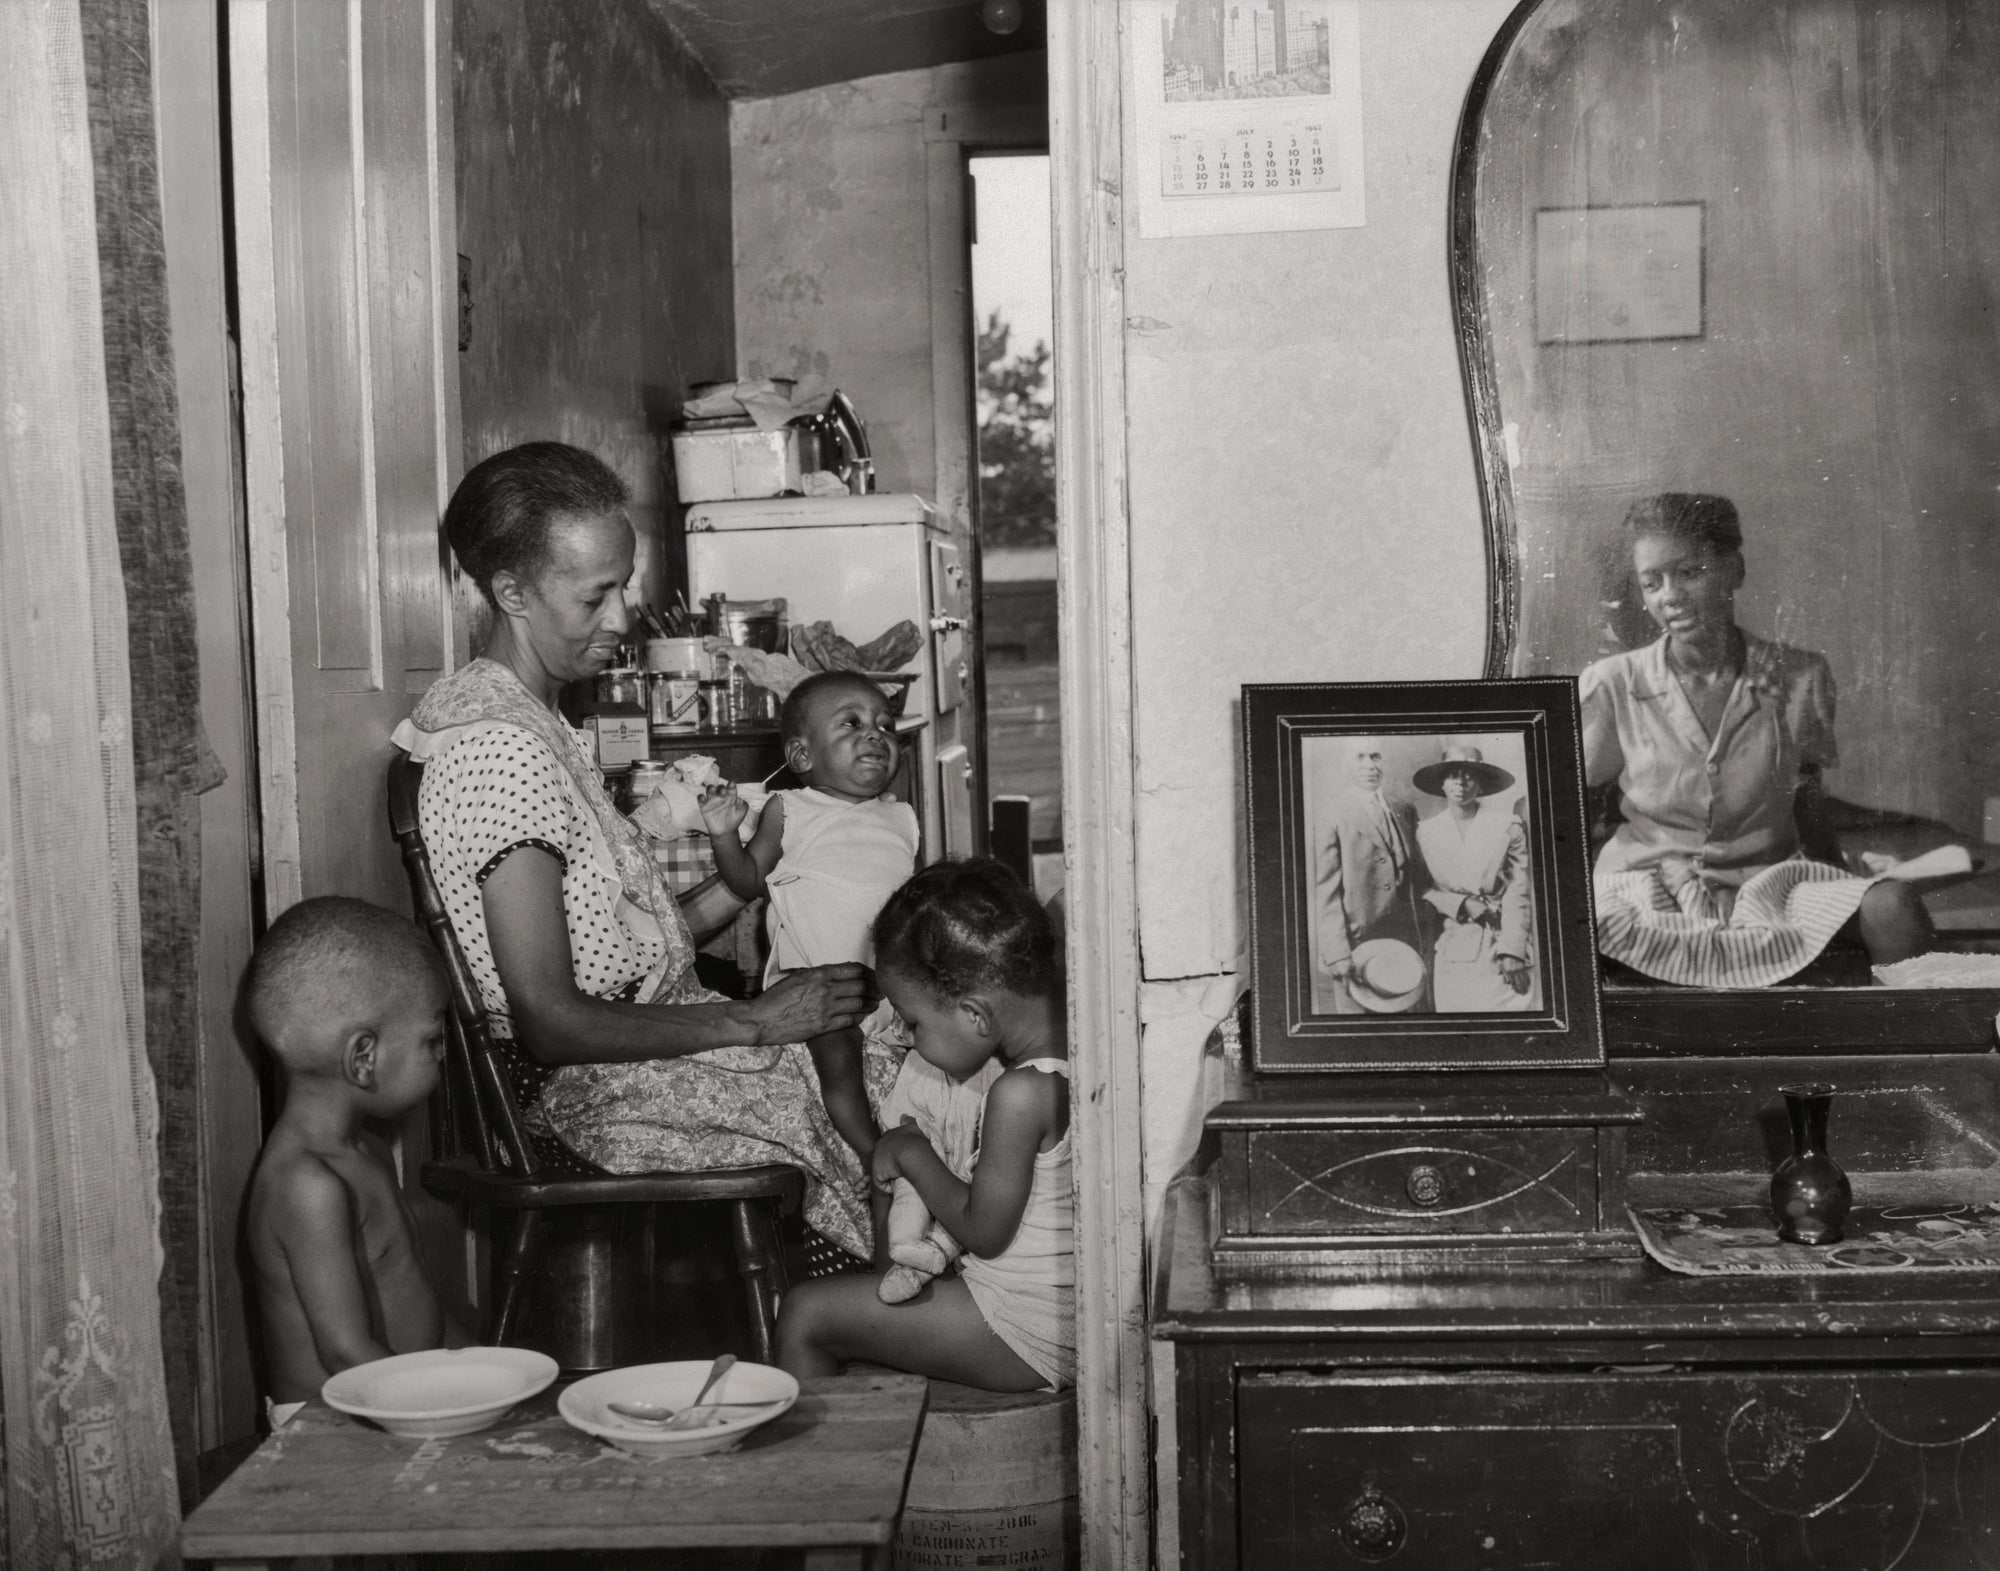 Gordon Parks, African American Photo of Women and Children, 1942 Historical Pix